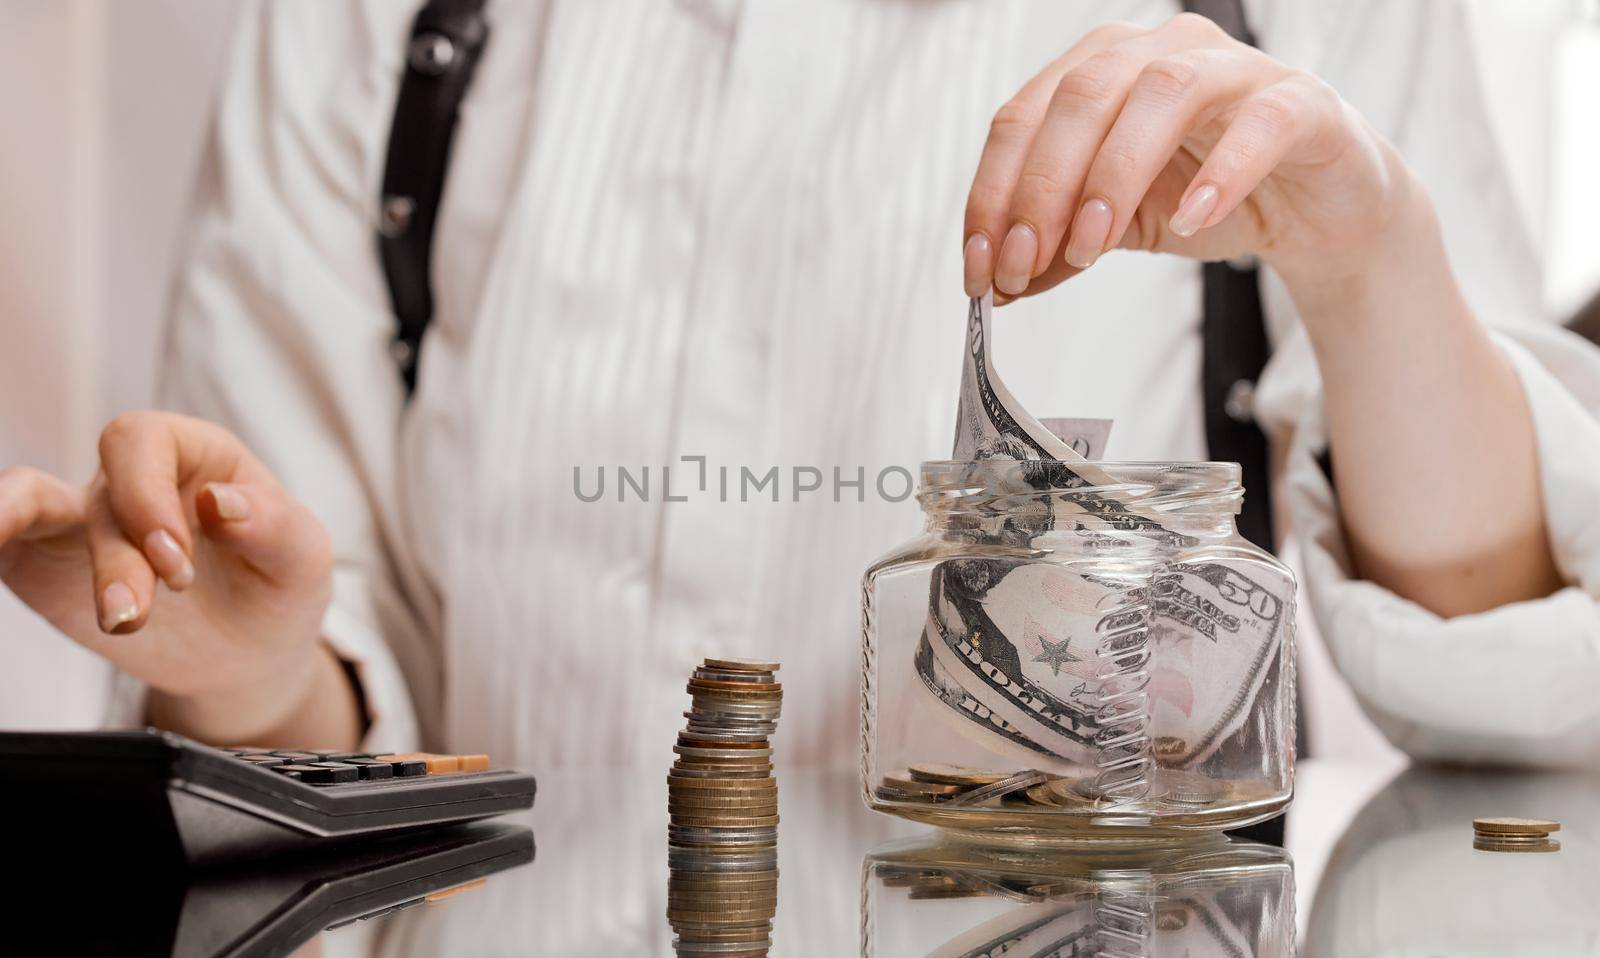 woman after counting on a classic calculator pulls a banknote from the jar by AntonIlchanka